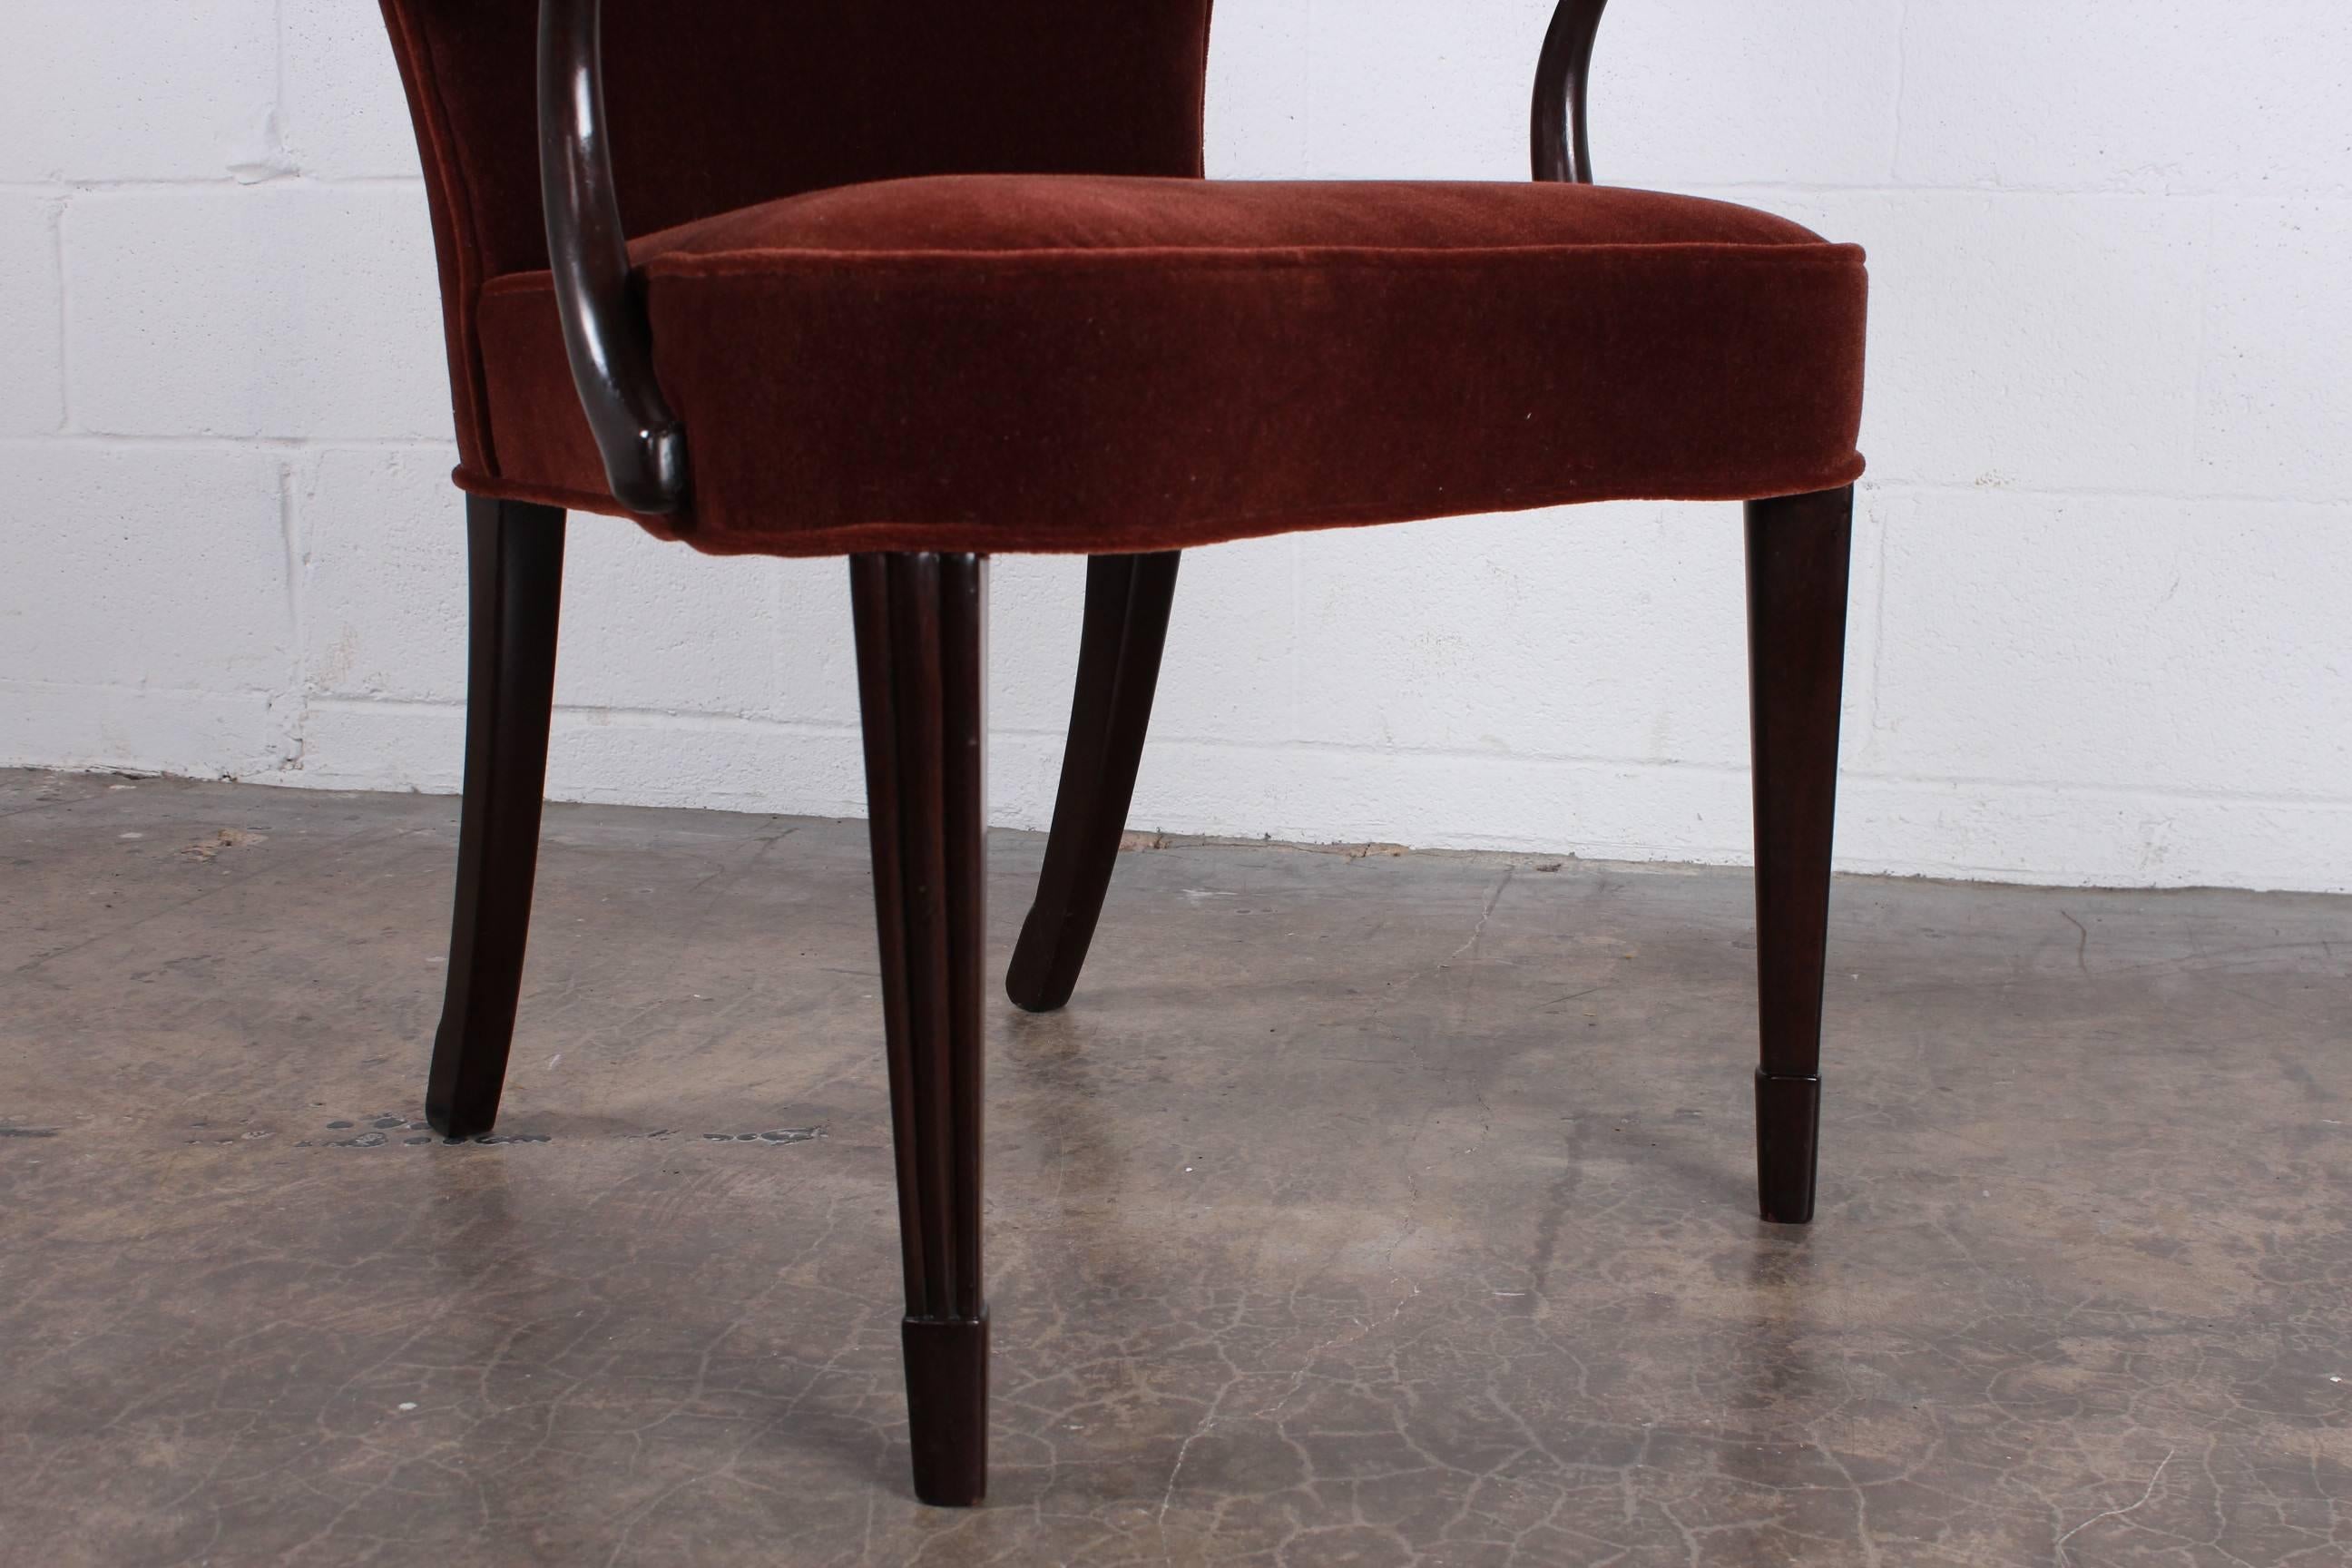 A pair of mahogany armchairs newly upholstered in rust mohair. Designed by Edward Wormley for Dunbar.